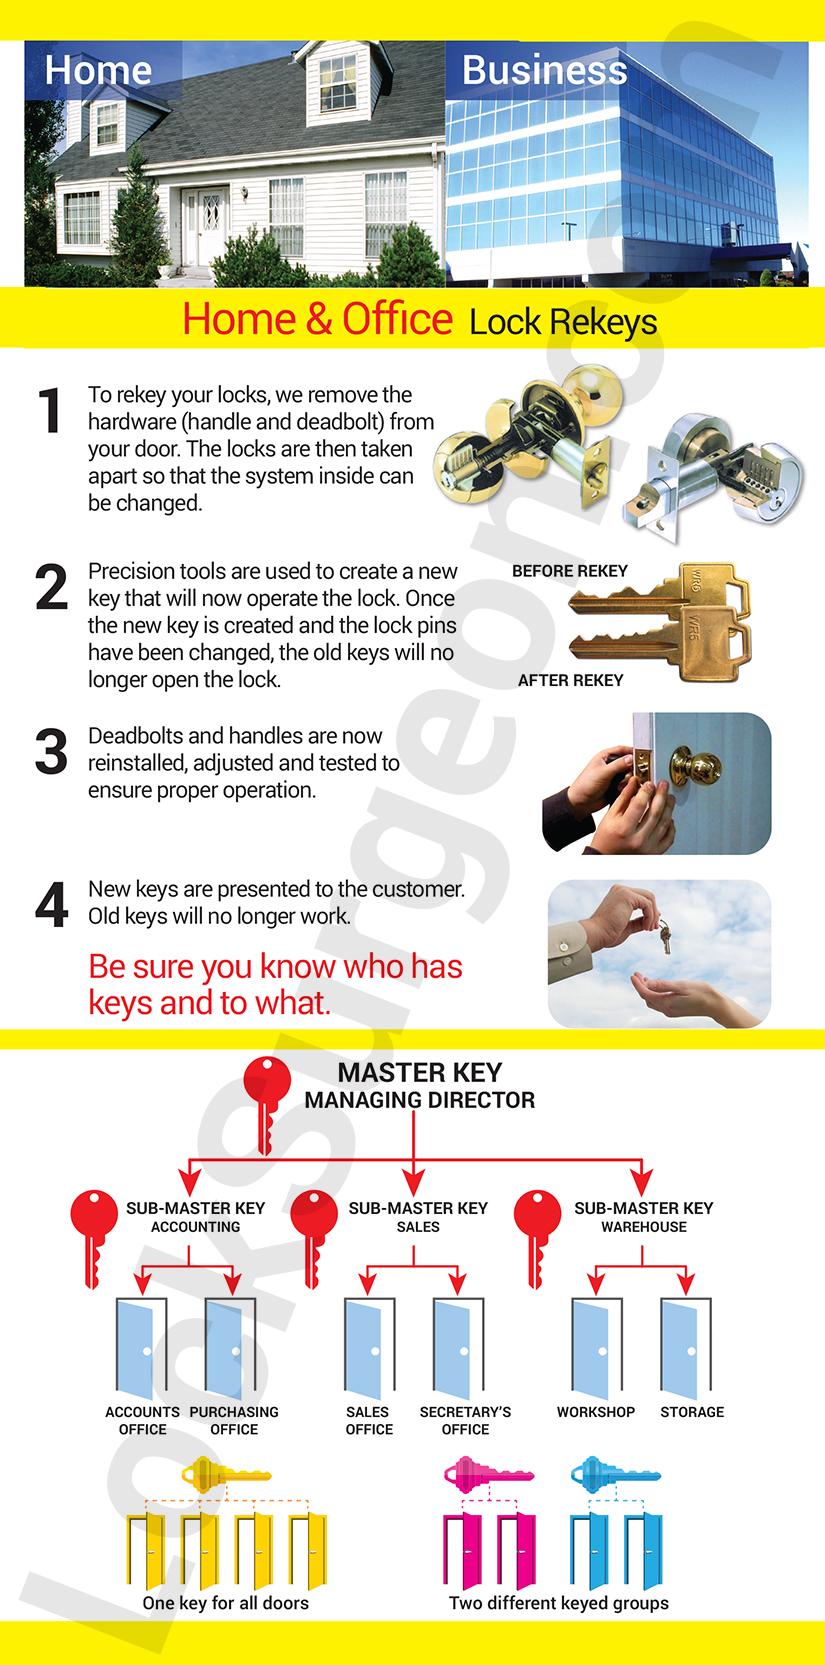 Lock Surgeon Edmonton South in store advice assistance and products for lock rekeying.